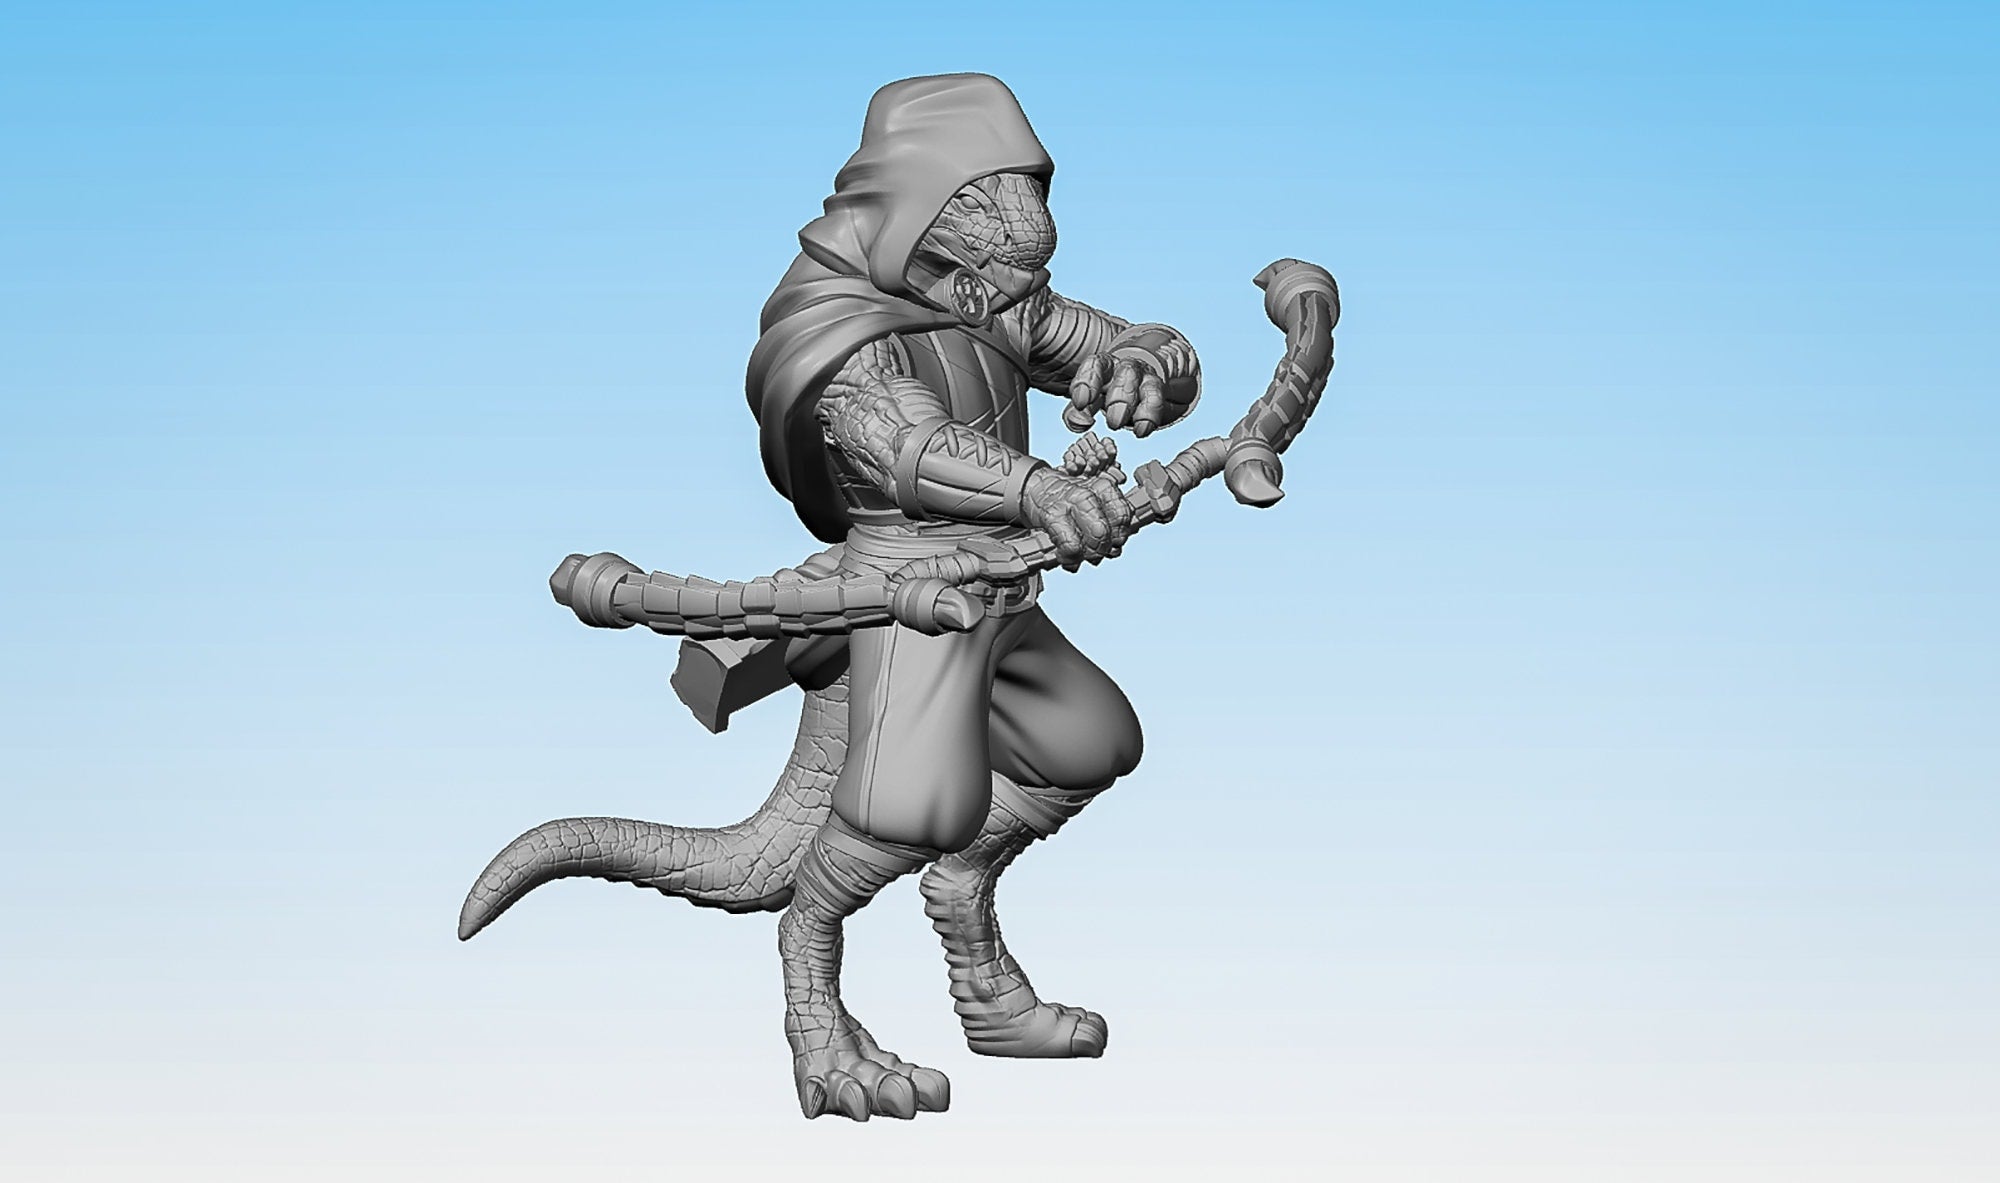 DRAGONBORN "Ranger Bow" | Dungeons and Dragons | DnD | Pathfinder | Tabletop | RPG | Hero Size | 28 mm-Role Playing Miniatures